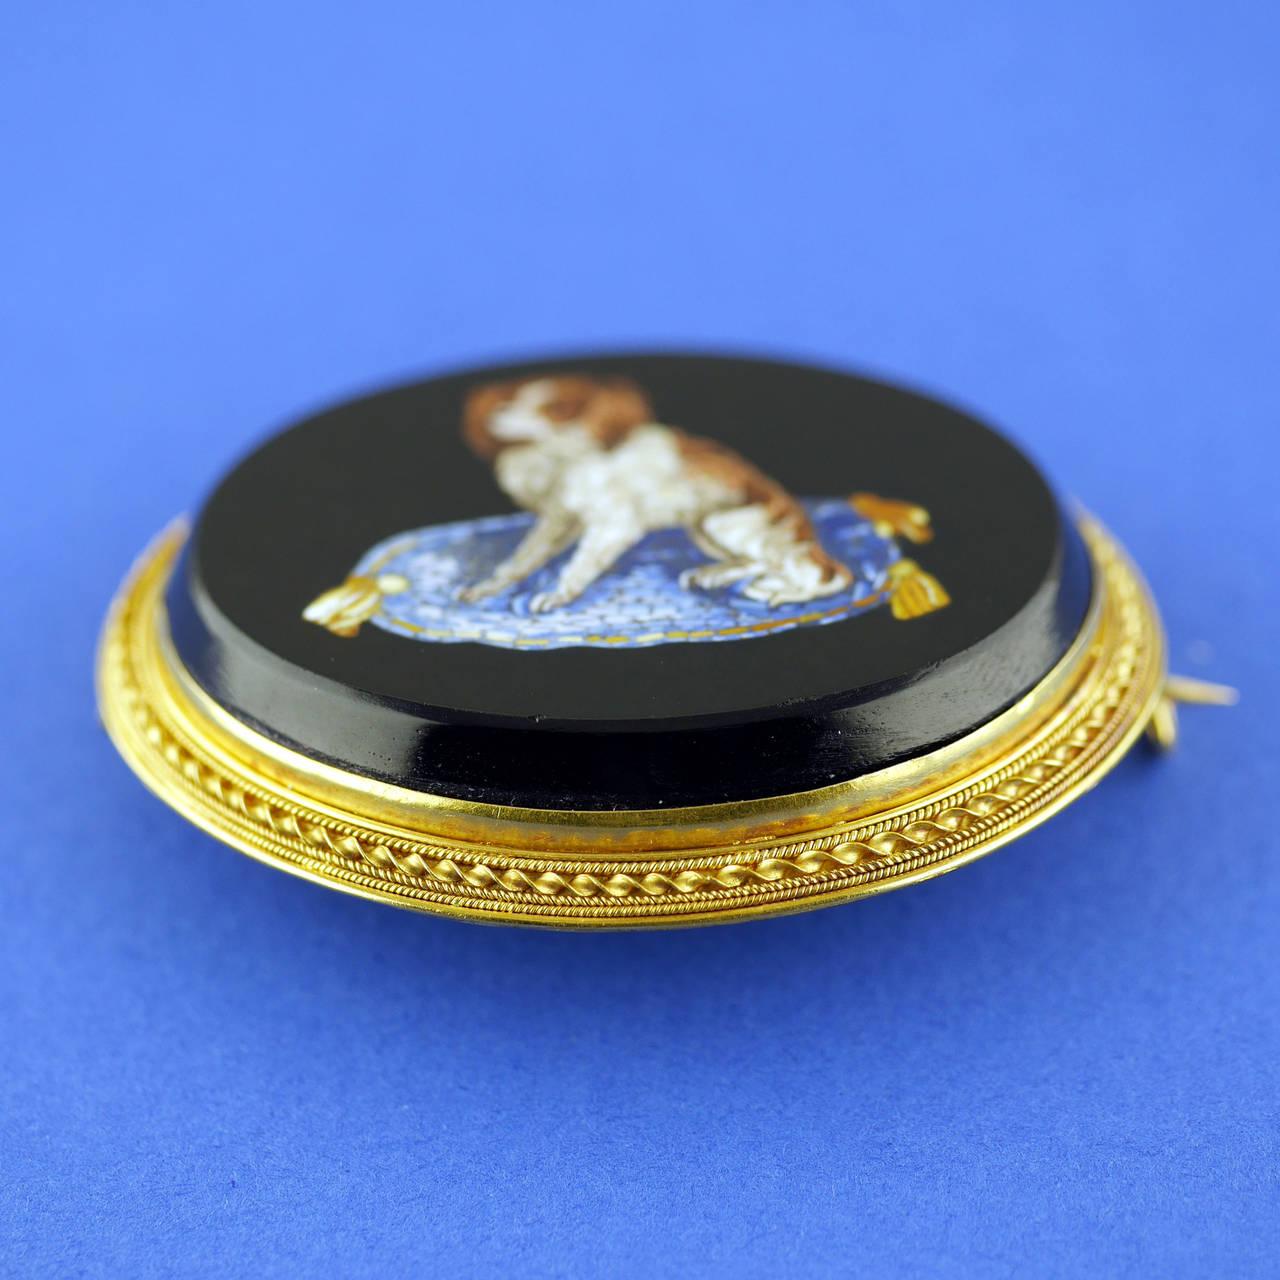 Victorian King Charles Spaniel Dog Micromosaic Brooch, circa 1870 In Excellent Condition For Sale In London, GB